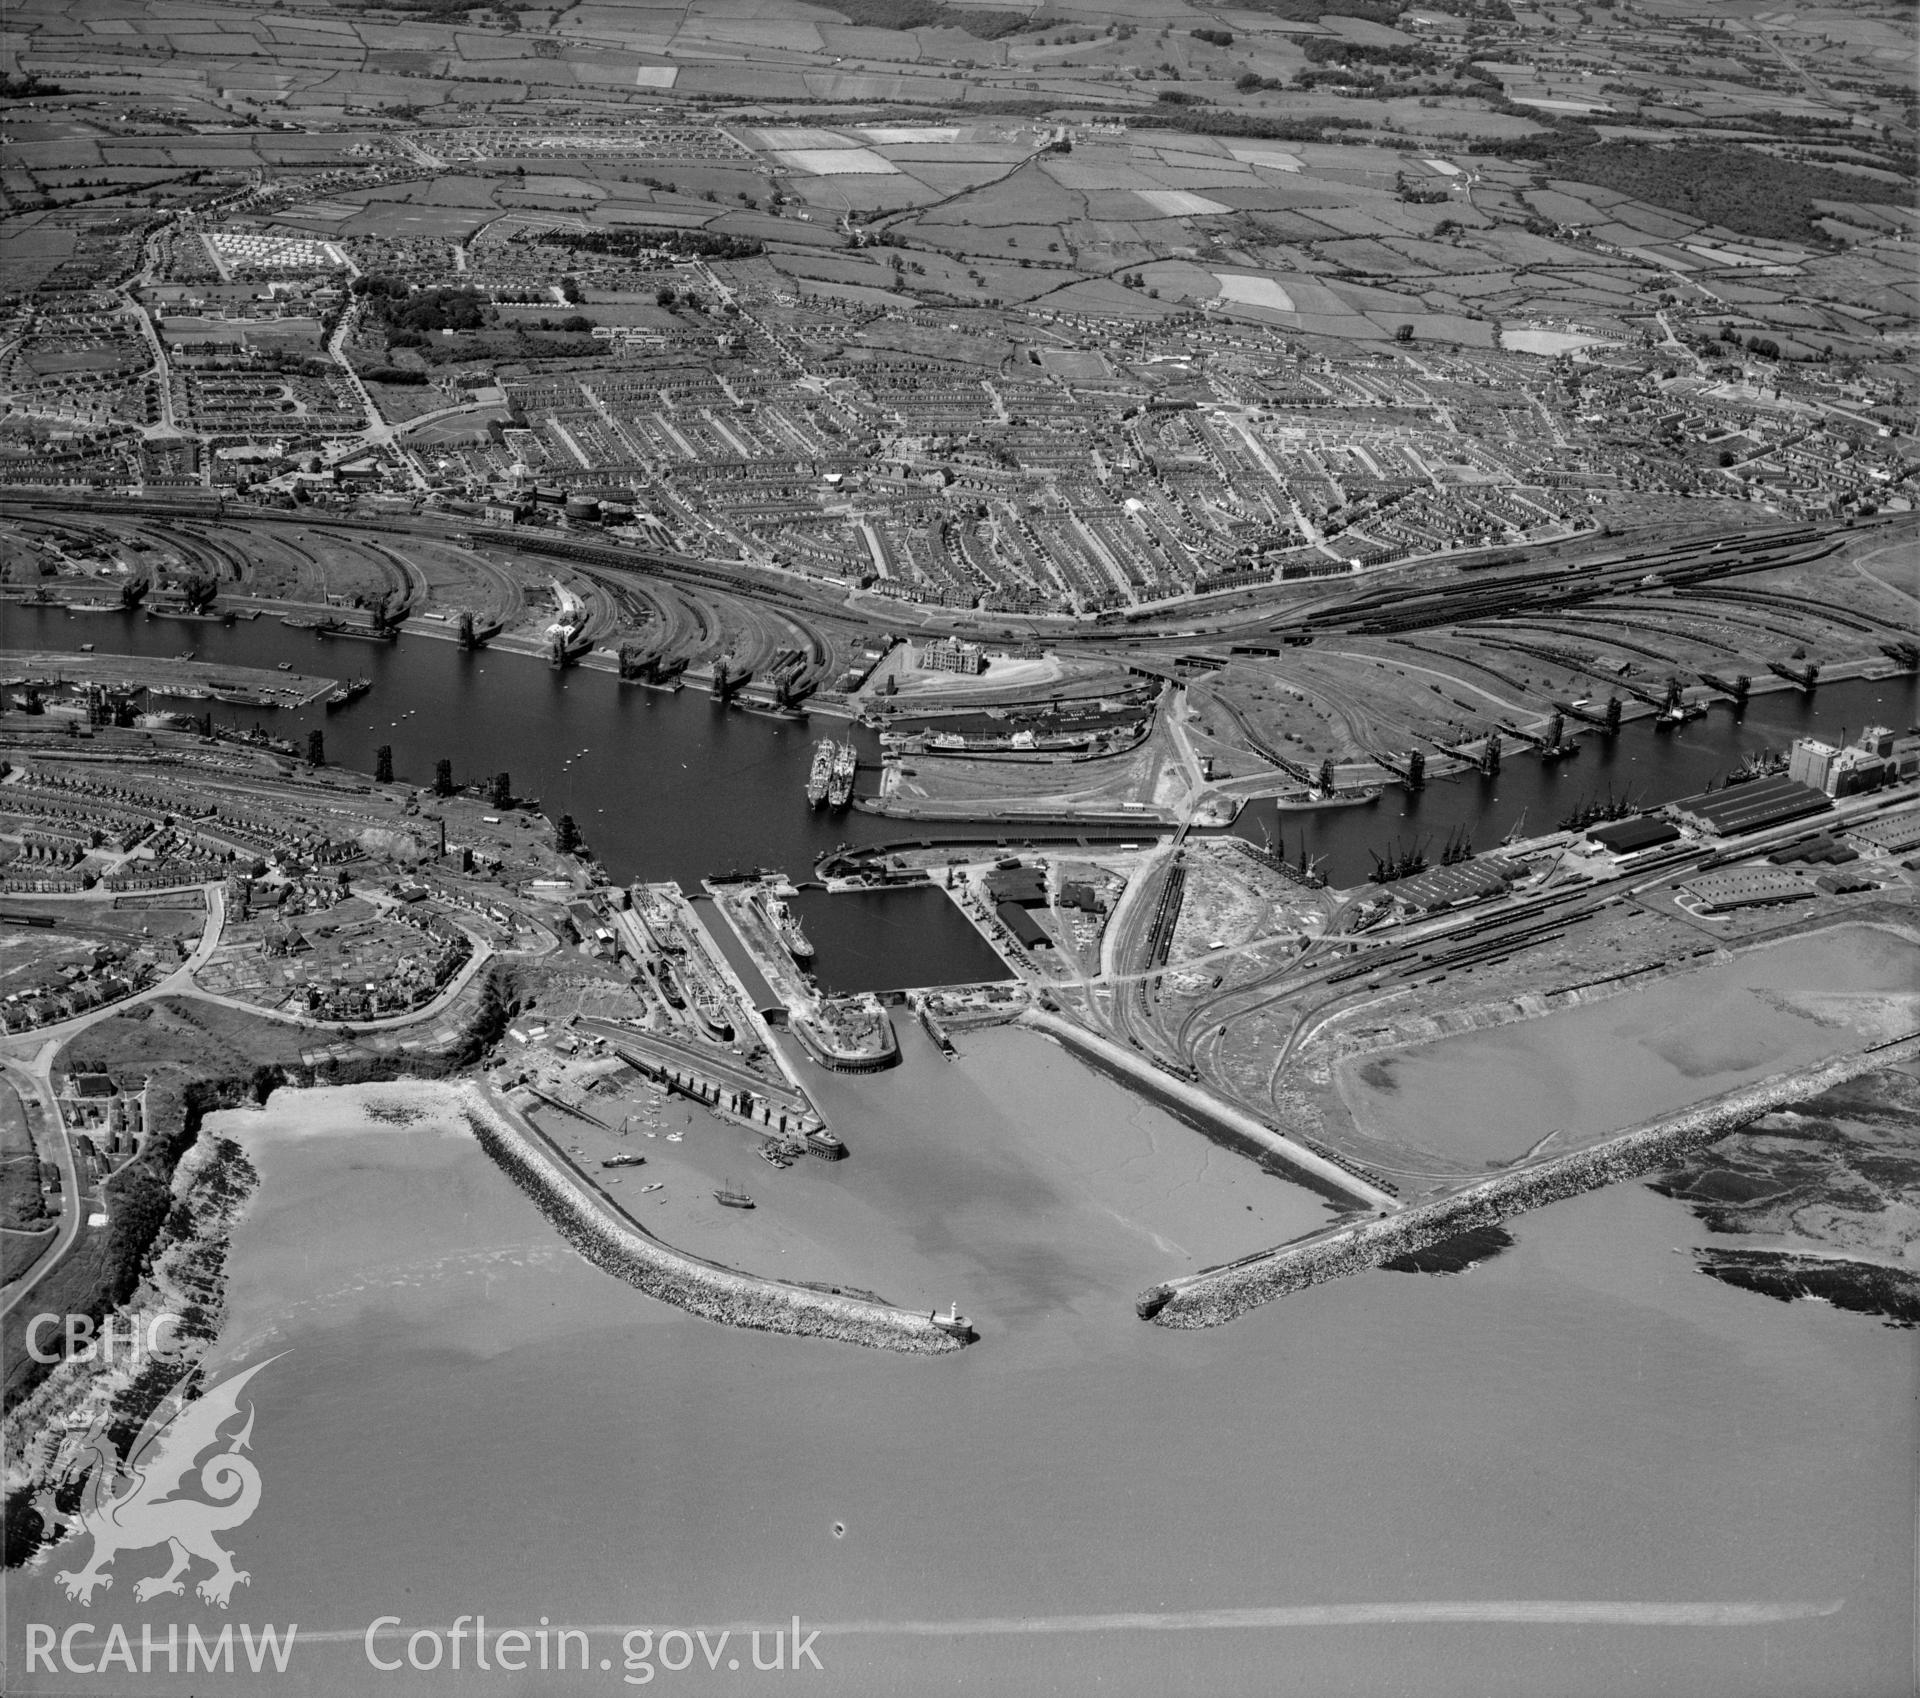 View of Barry showing docks